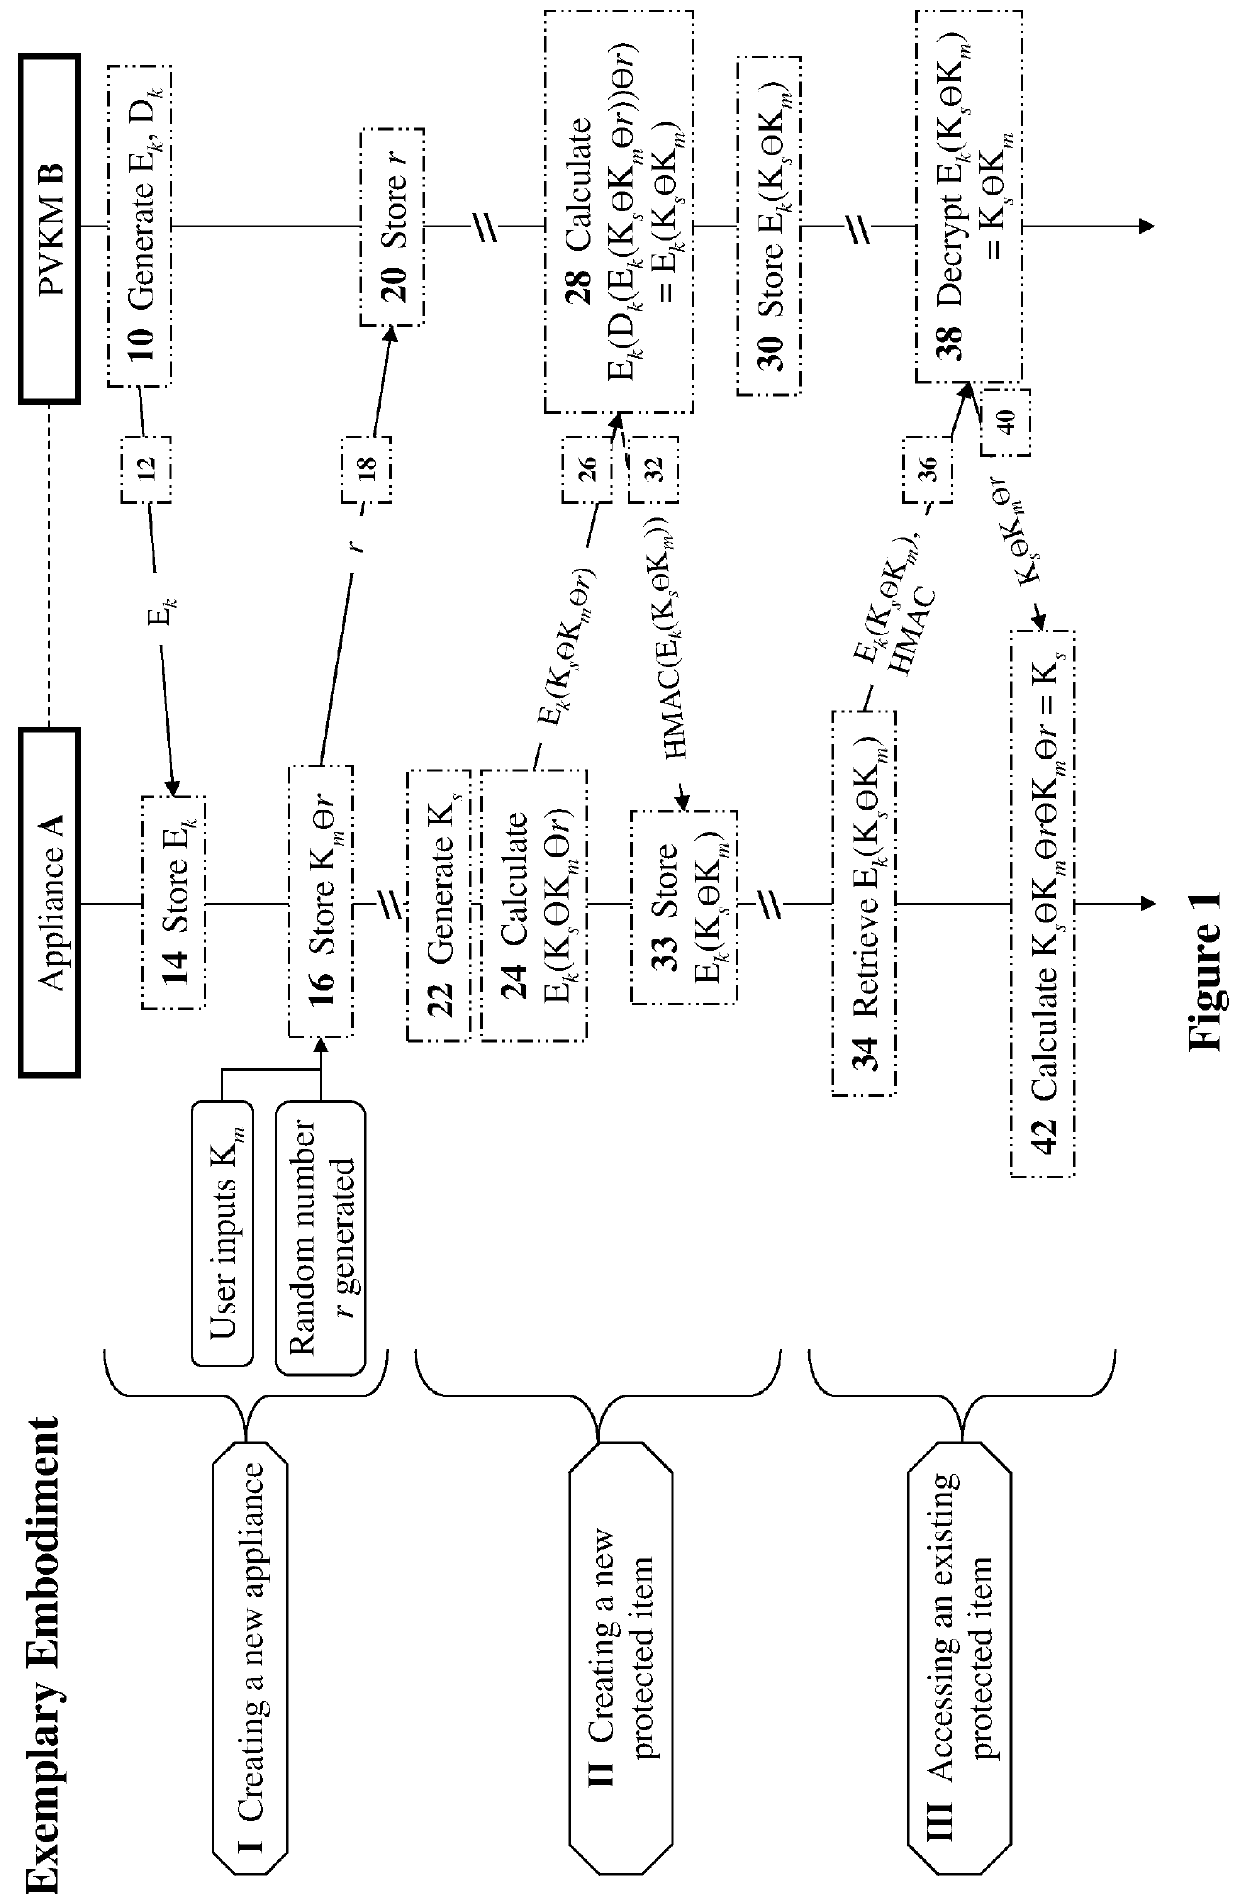 Methods and devices for securing keys for a nonsecured, distributed environment with applications to virtualization and cloud-computing security and management